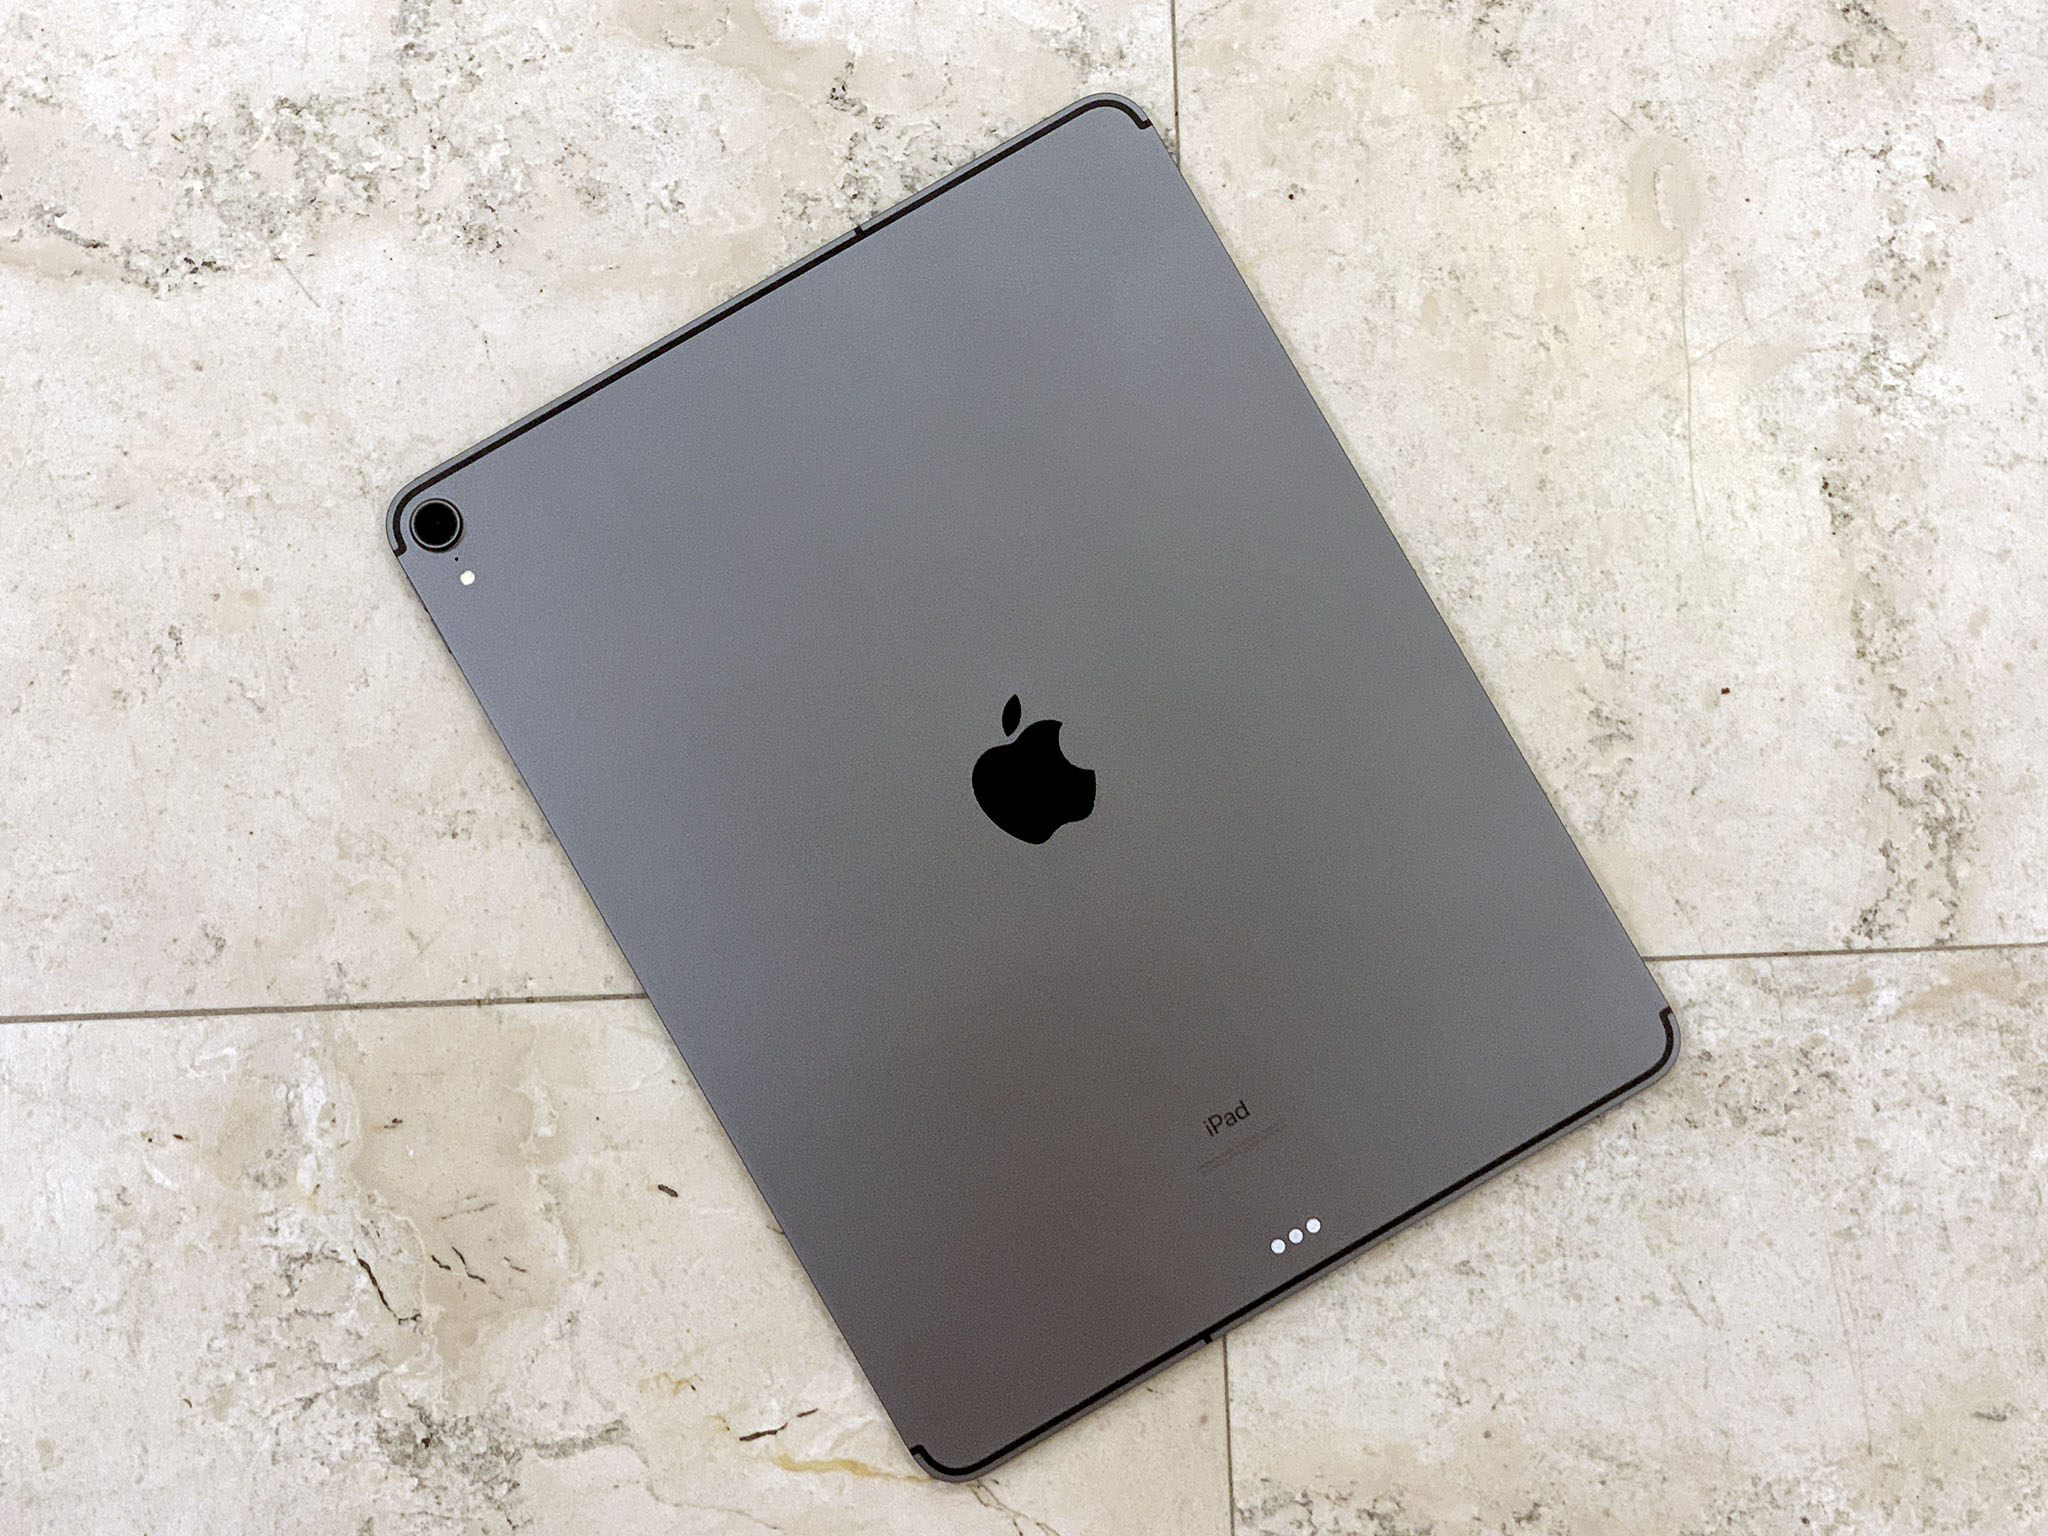 Which iPad U.S. cell carrier and plan should you get?